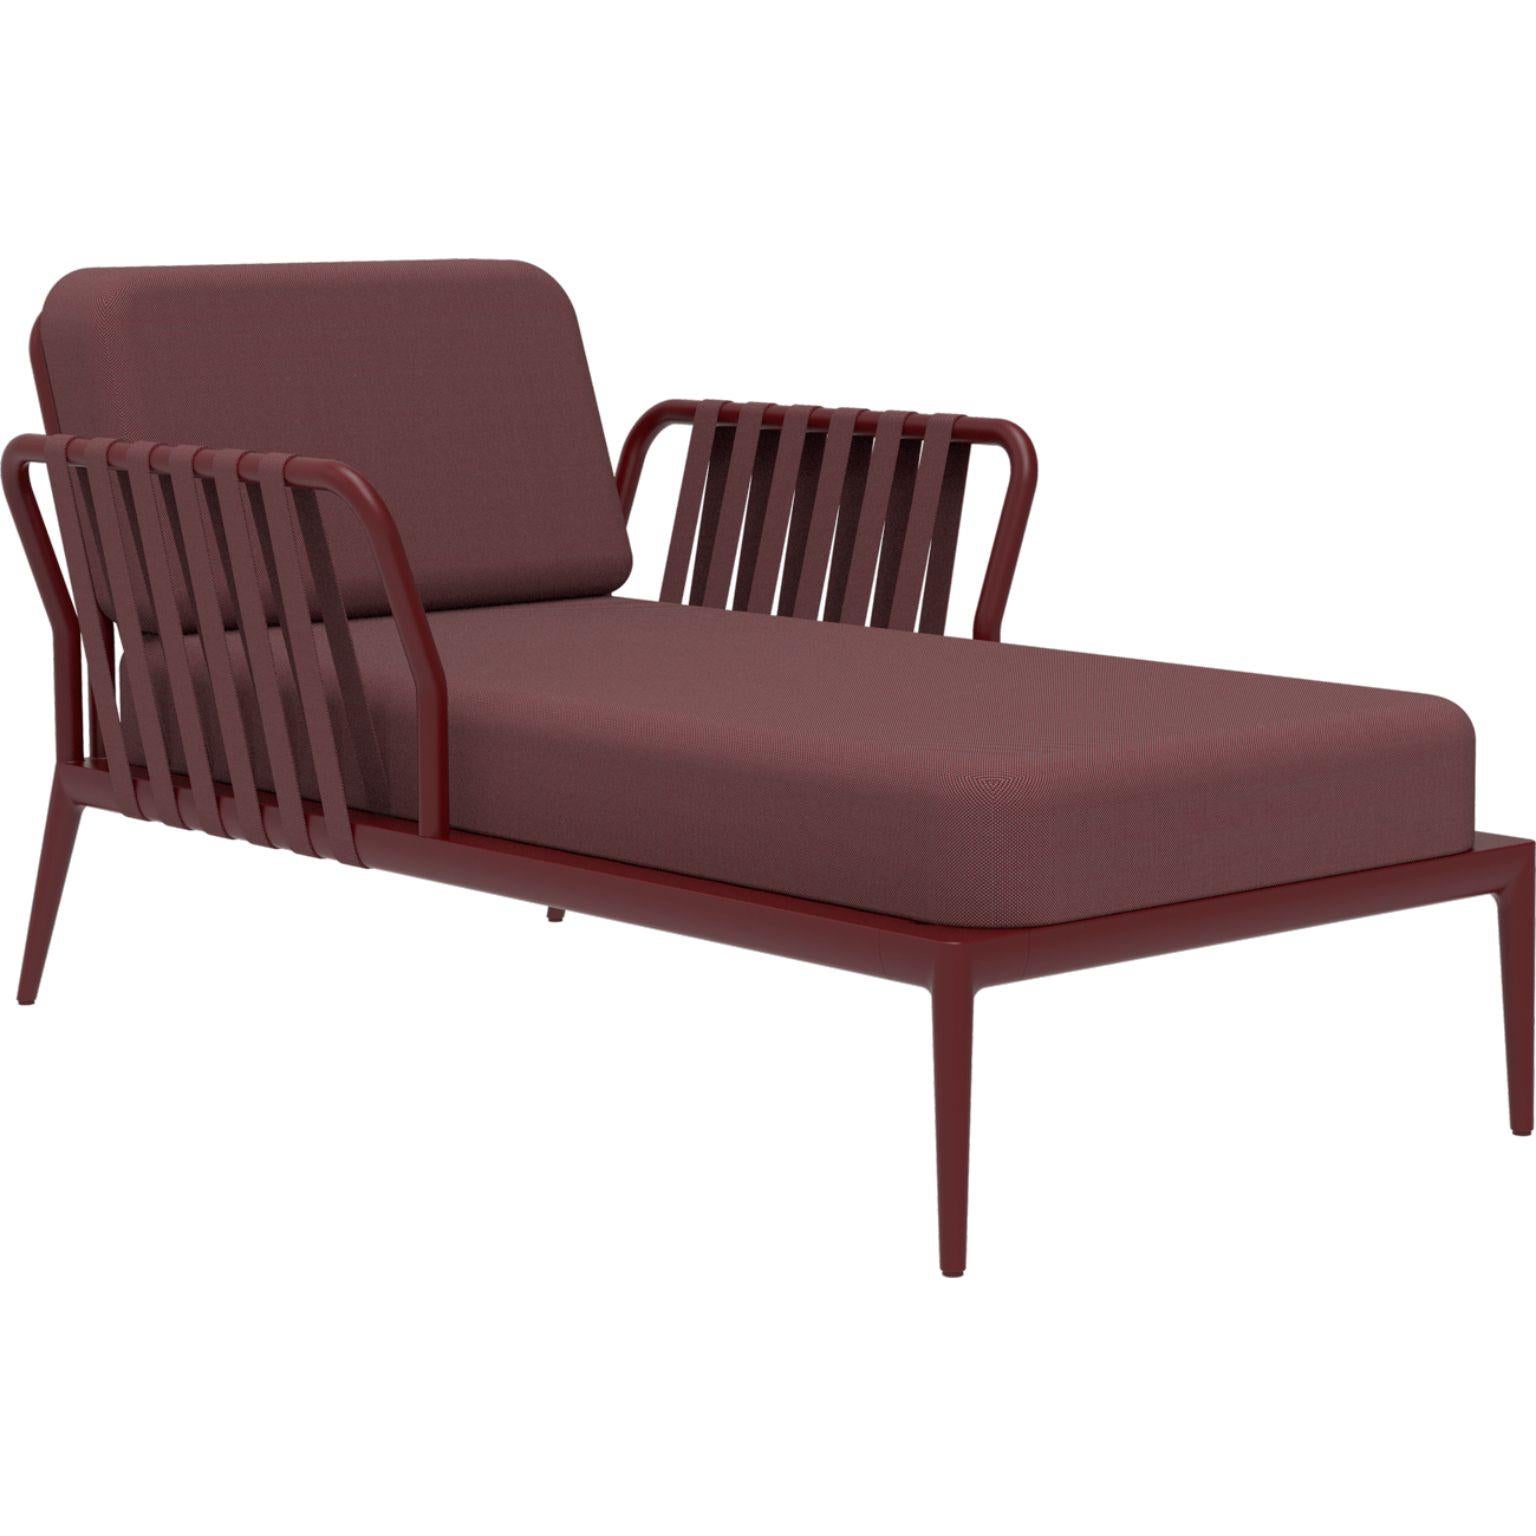 Ribbons Burgundy Divan by MOWEE
Dimensions: D91 x W155 x H81 cm (seat height 42cm)
Material: Aluminum and upholstery.
Weight: 30 kg.
Also available in different colors and finishes. 

An unmistakable collection for its beauty and robustness. A